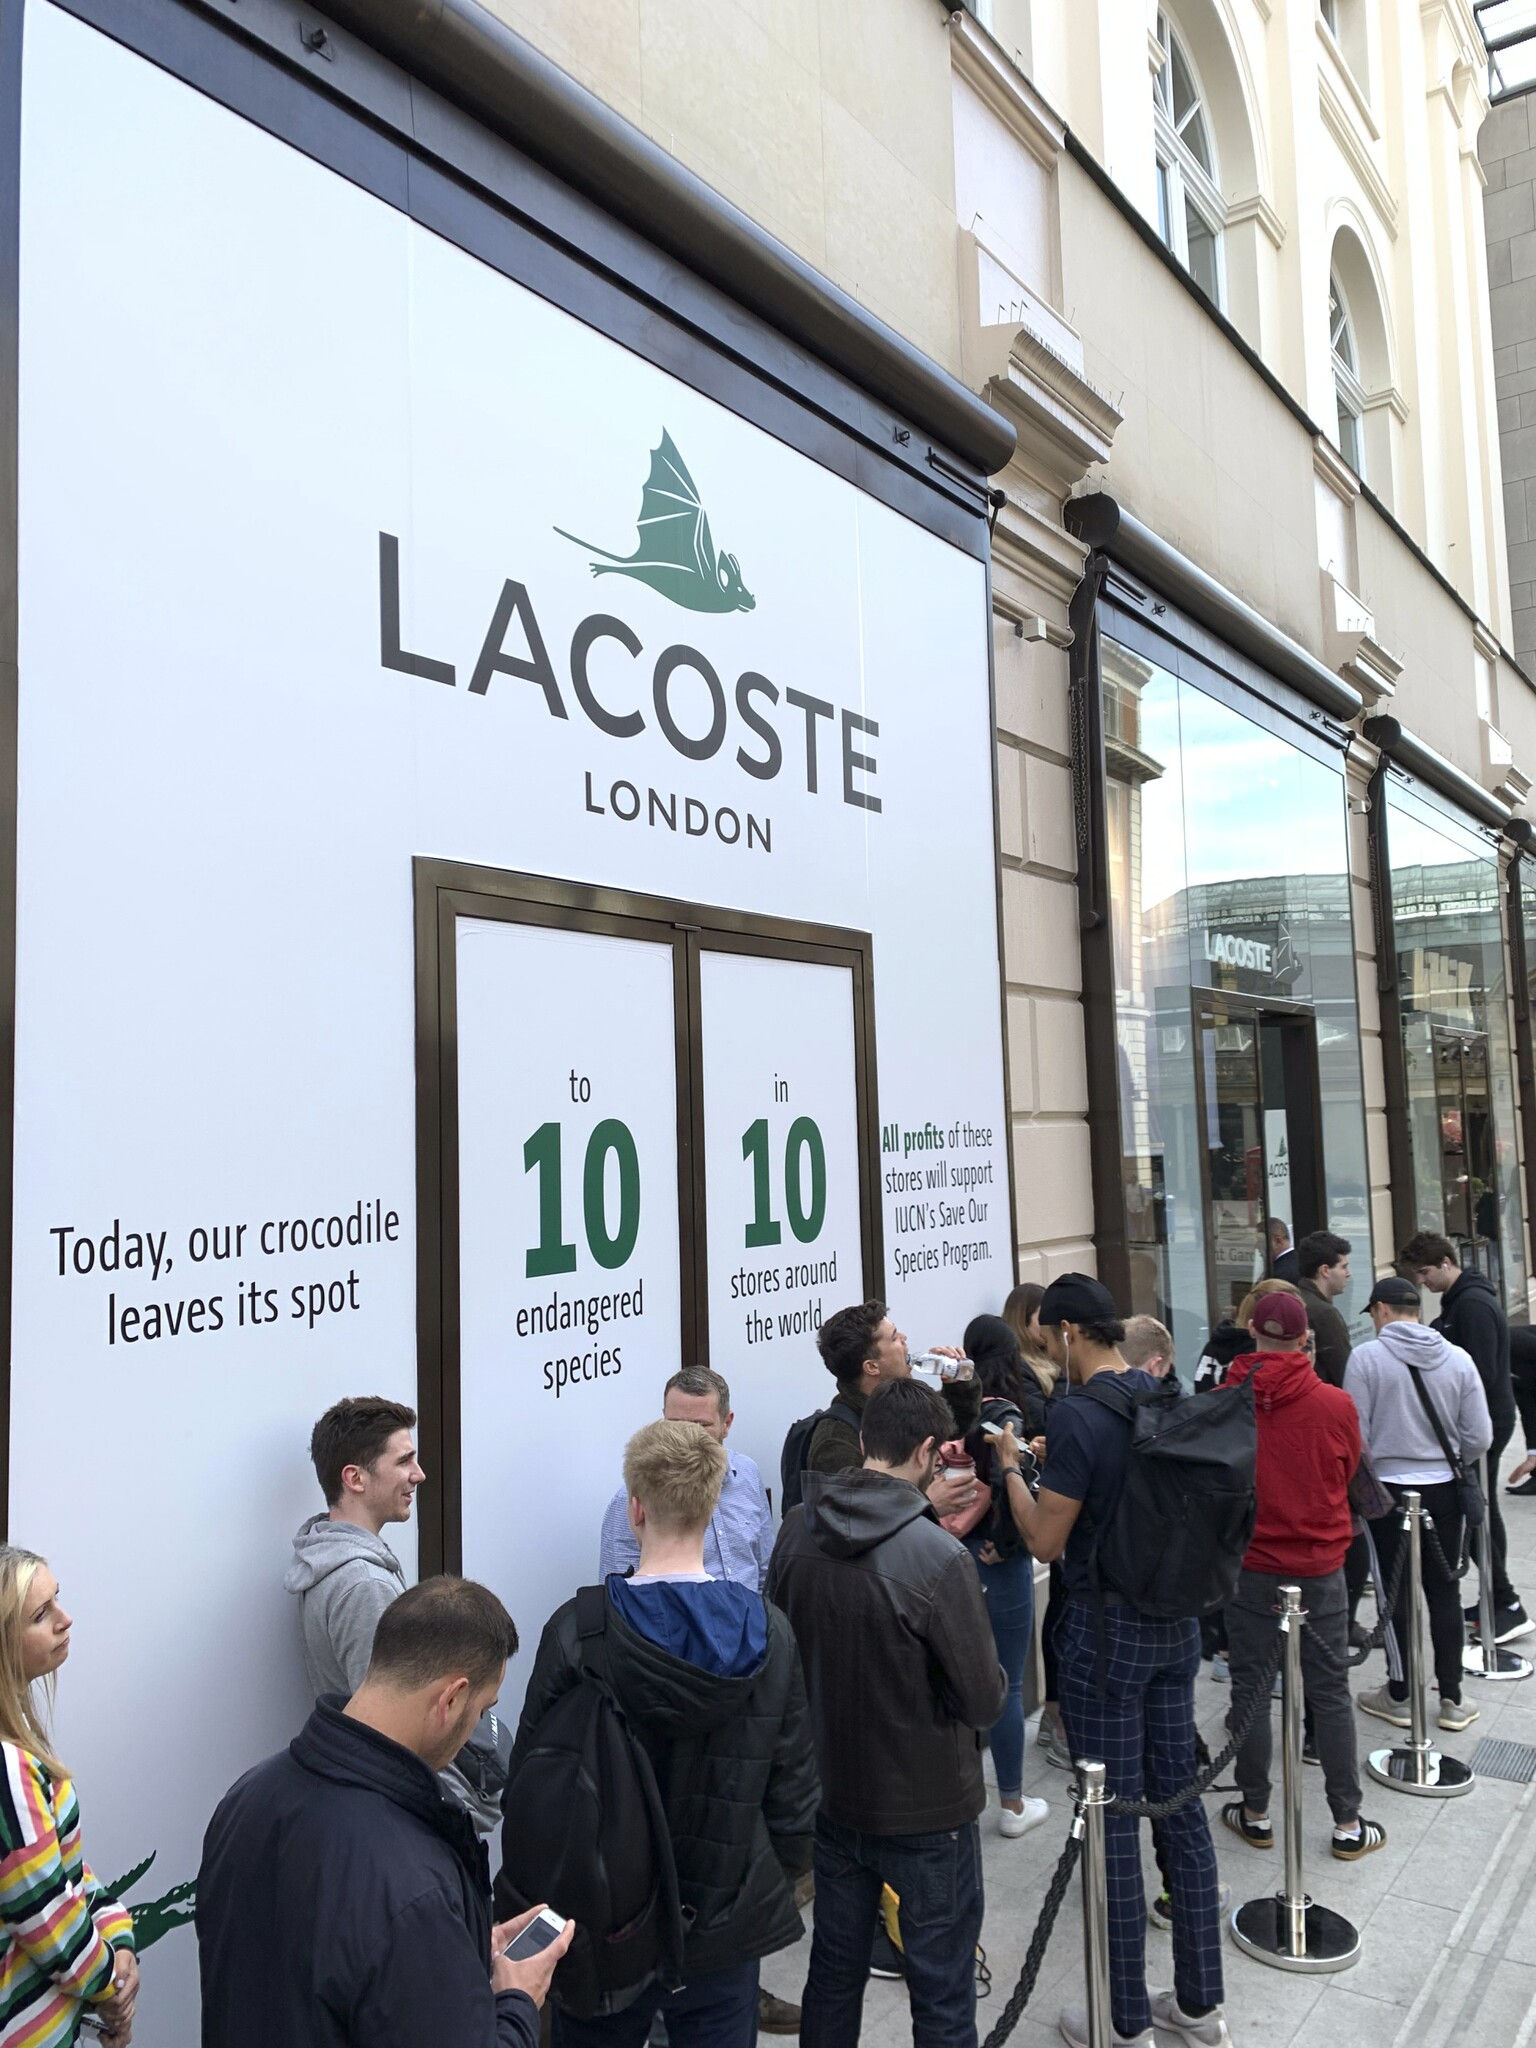 Lacoste x Save Our Images | LBBOnline